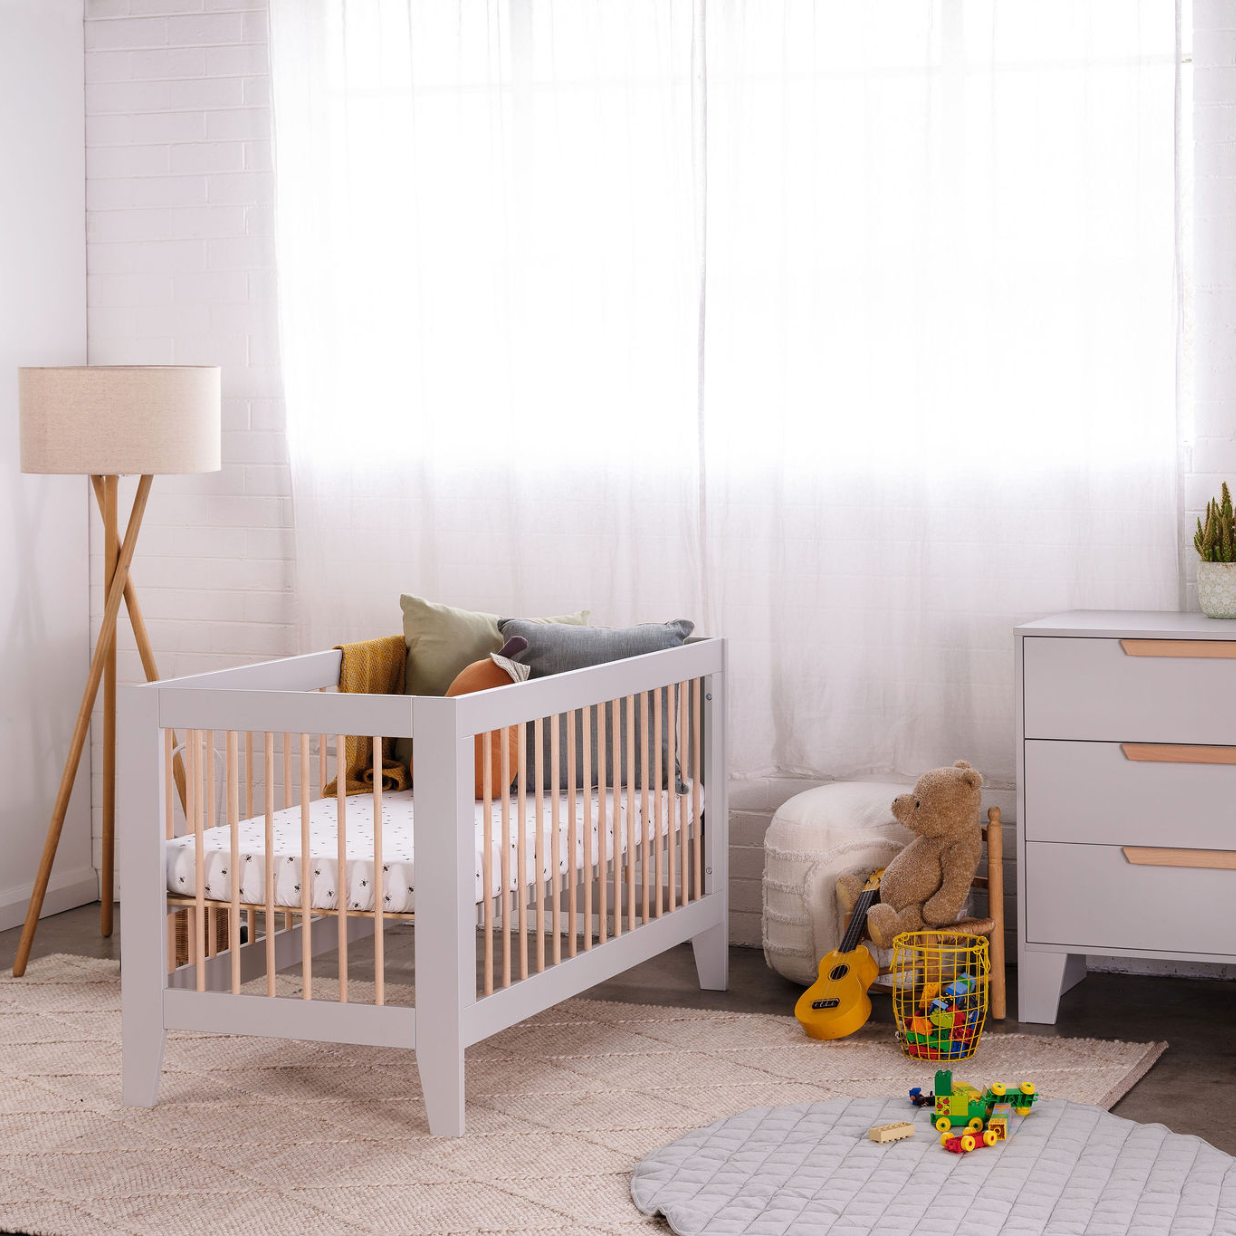 Hague Cot & Chest Nursery Package - White/Natural